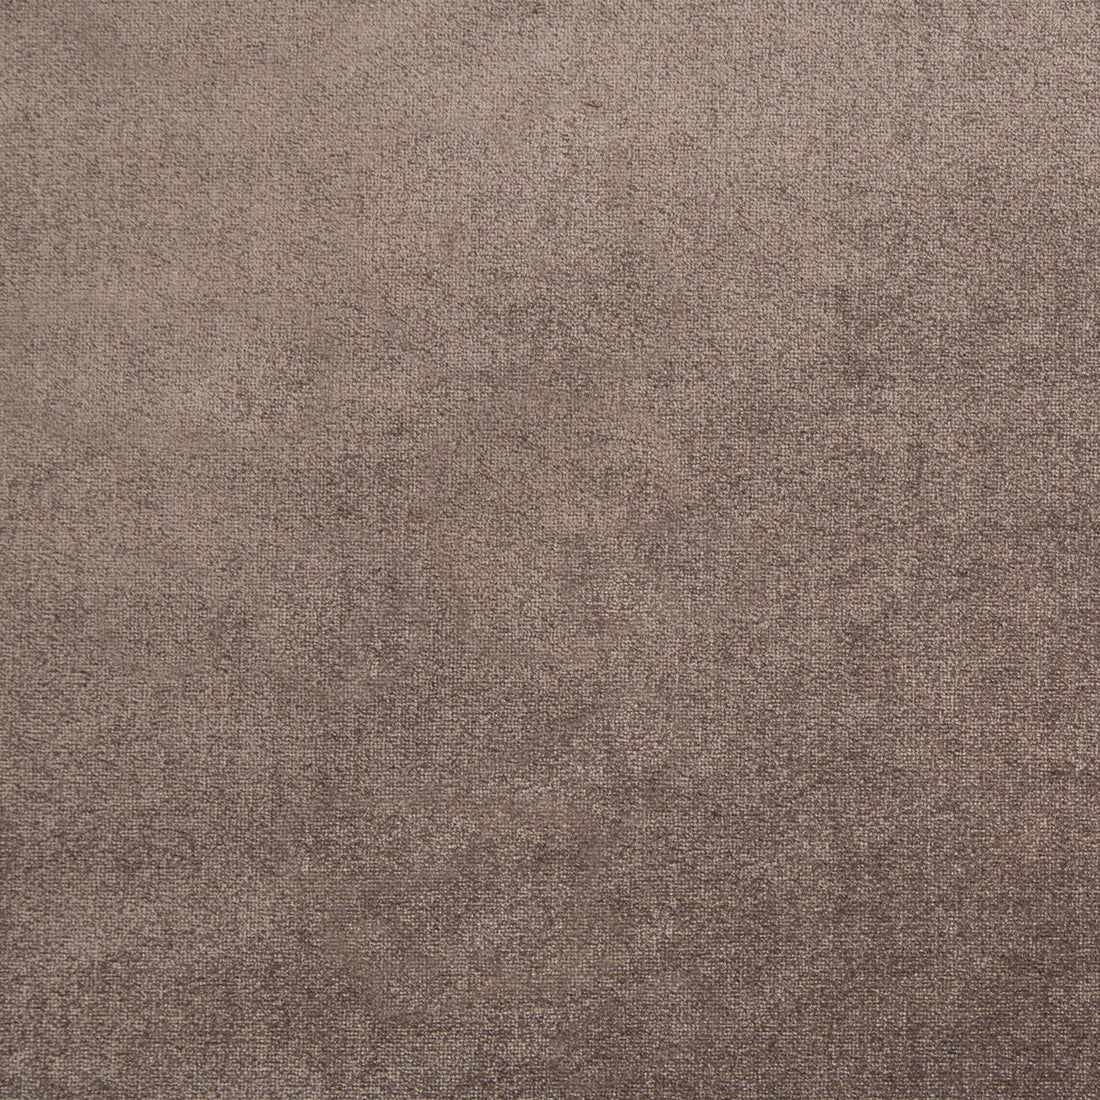 Duchess Velvet fabric in dusty mauve color - pattern 2016121.106.0 - by Lee Jofa